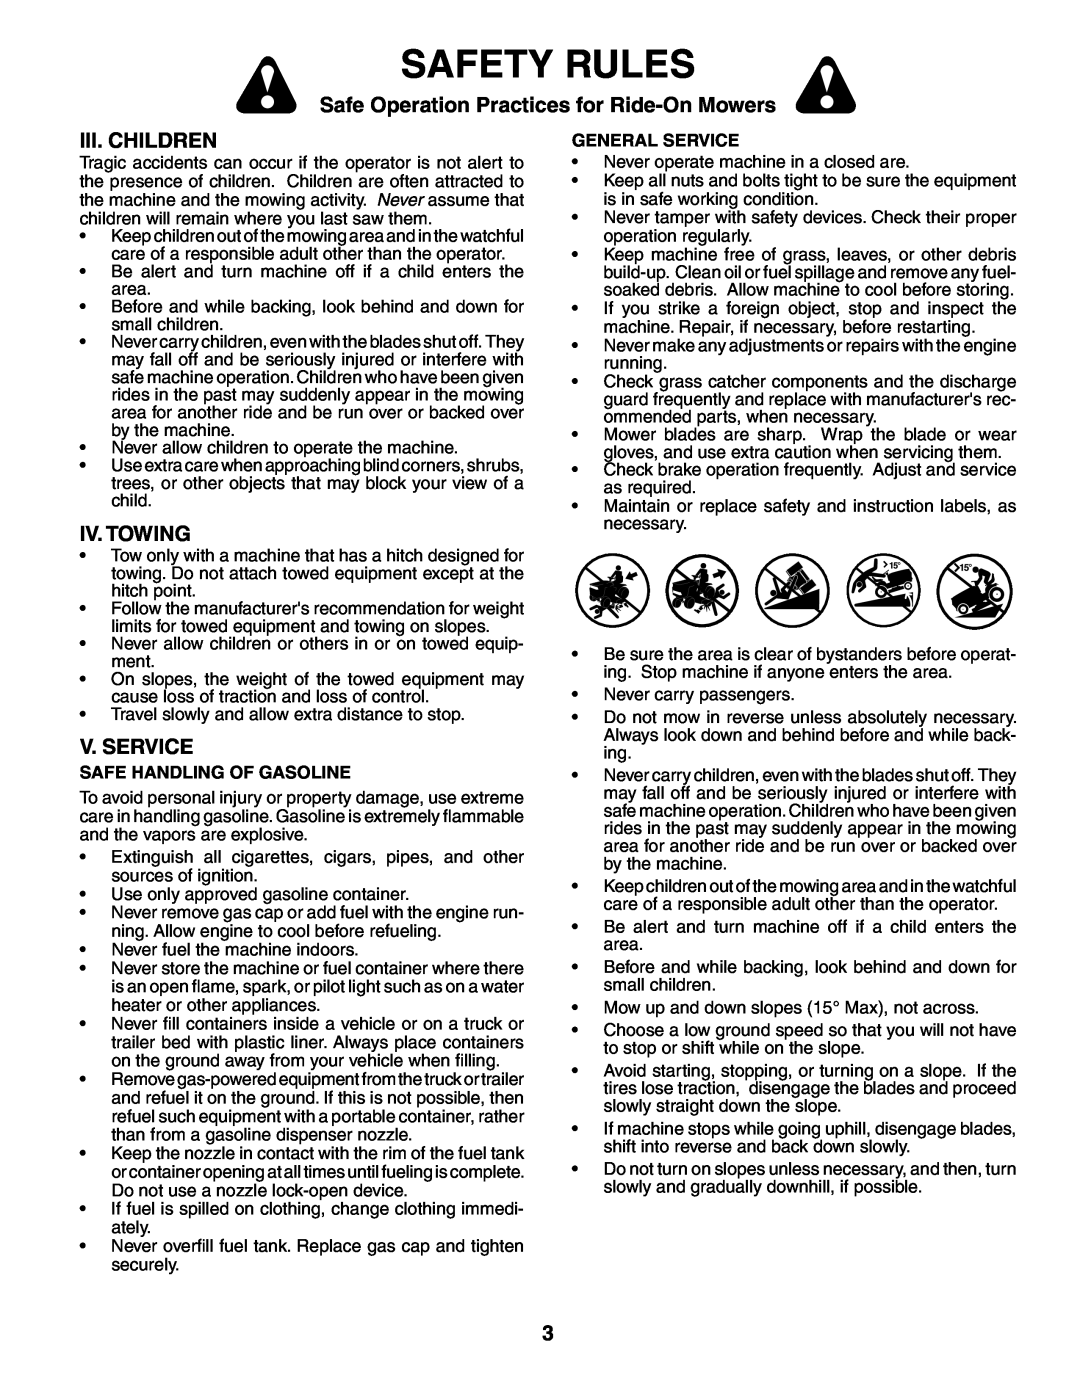 Poulan PK19H42LT manual Iii. Children, Iv. Towing, V. Service, Safety Rules, Safe Operation Practices for Ride-On Mowers 